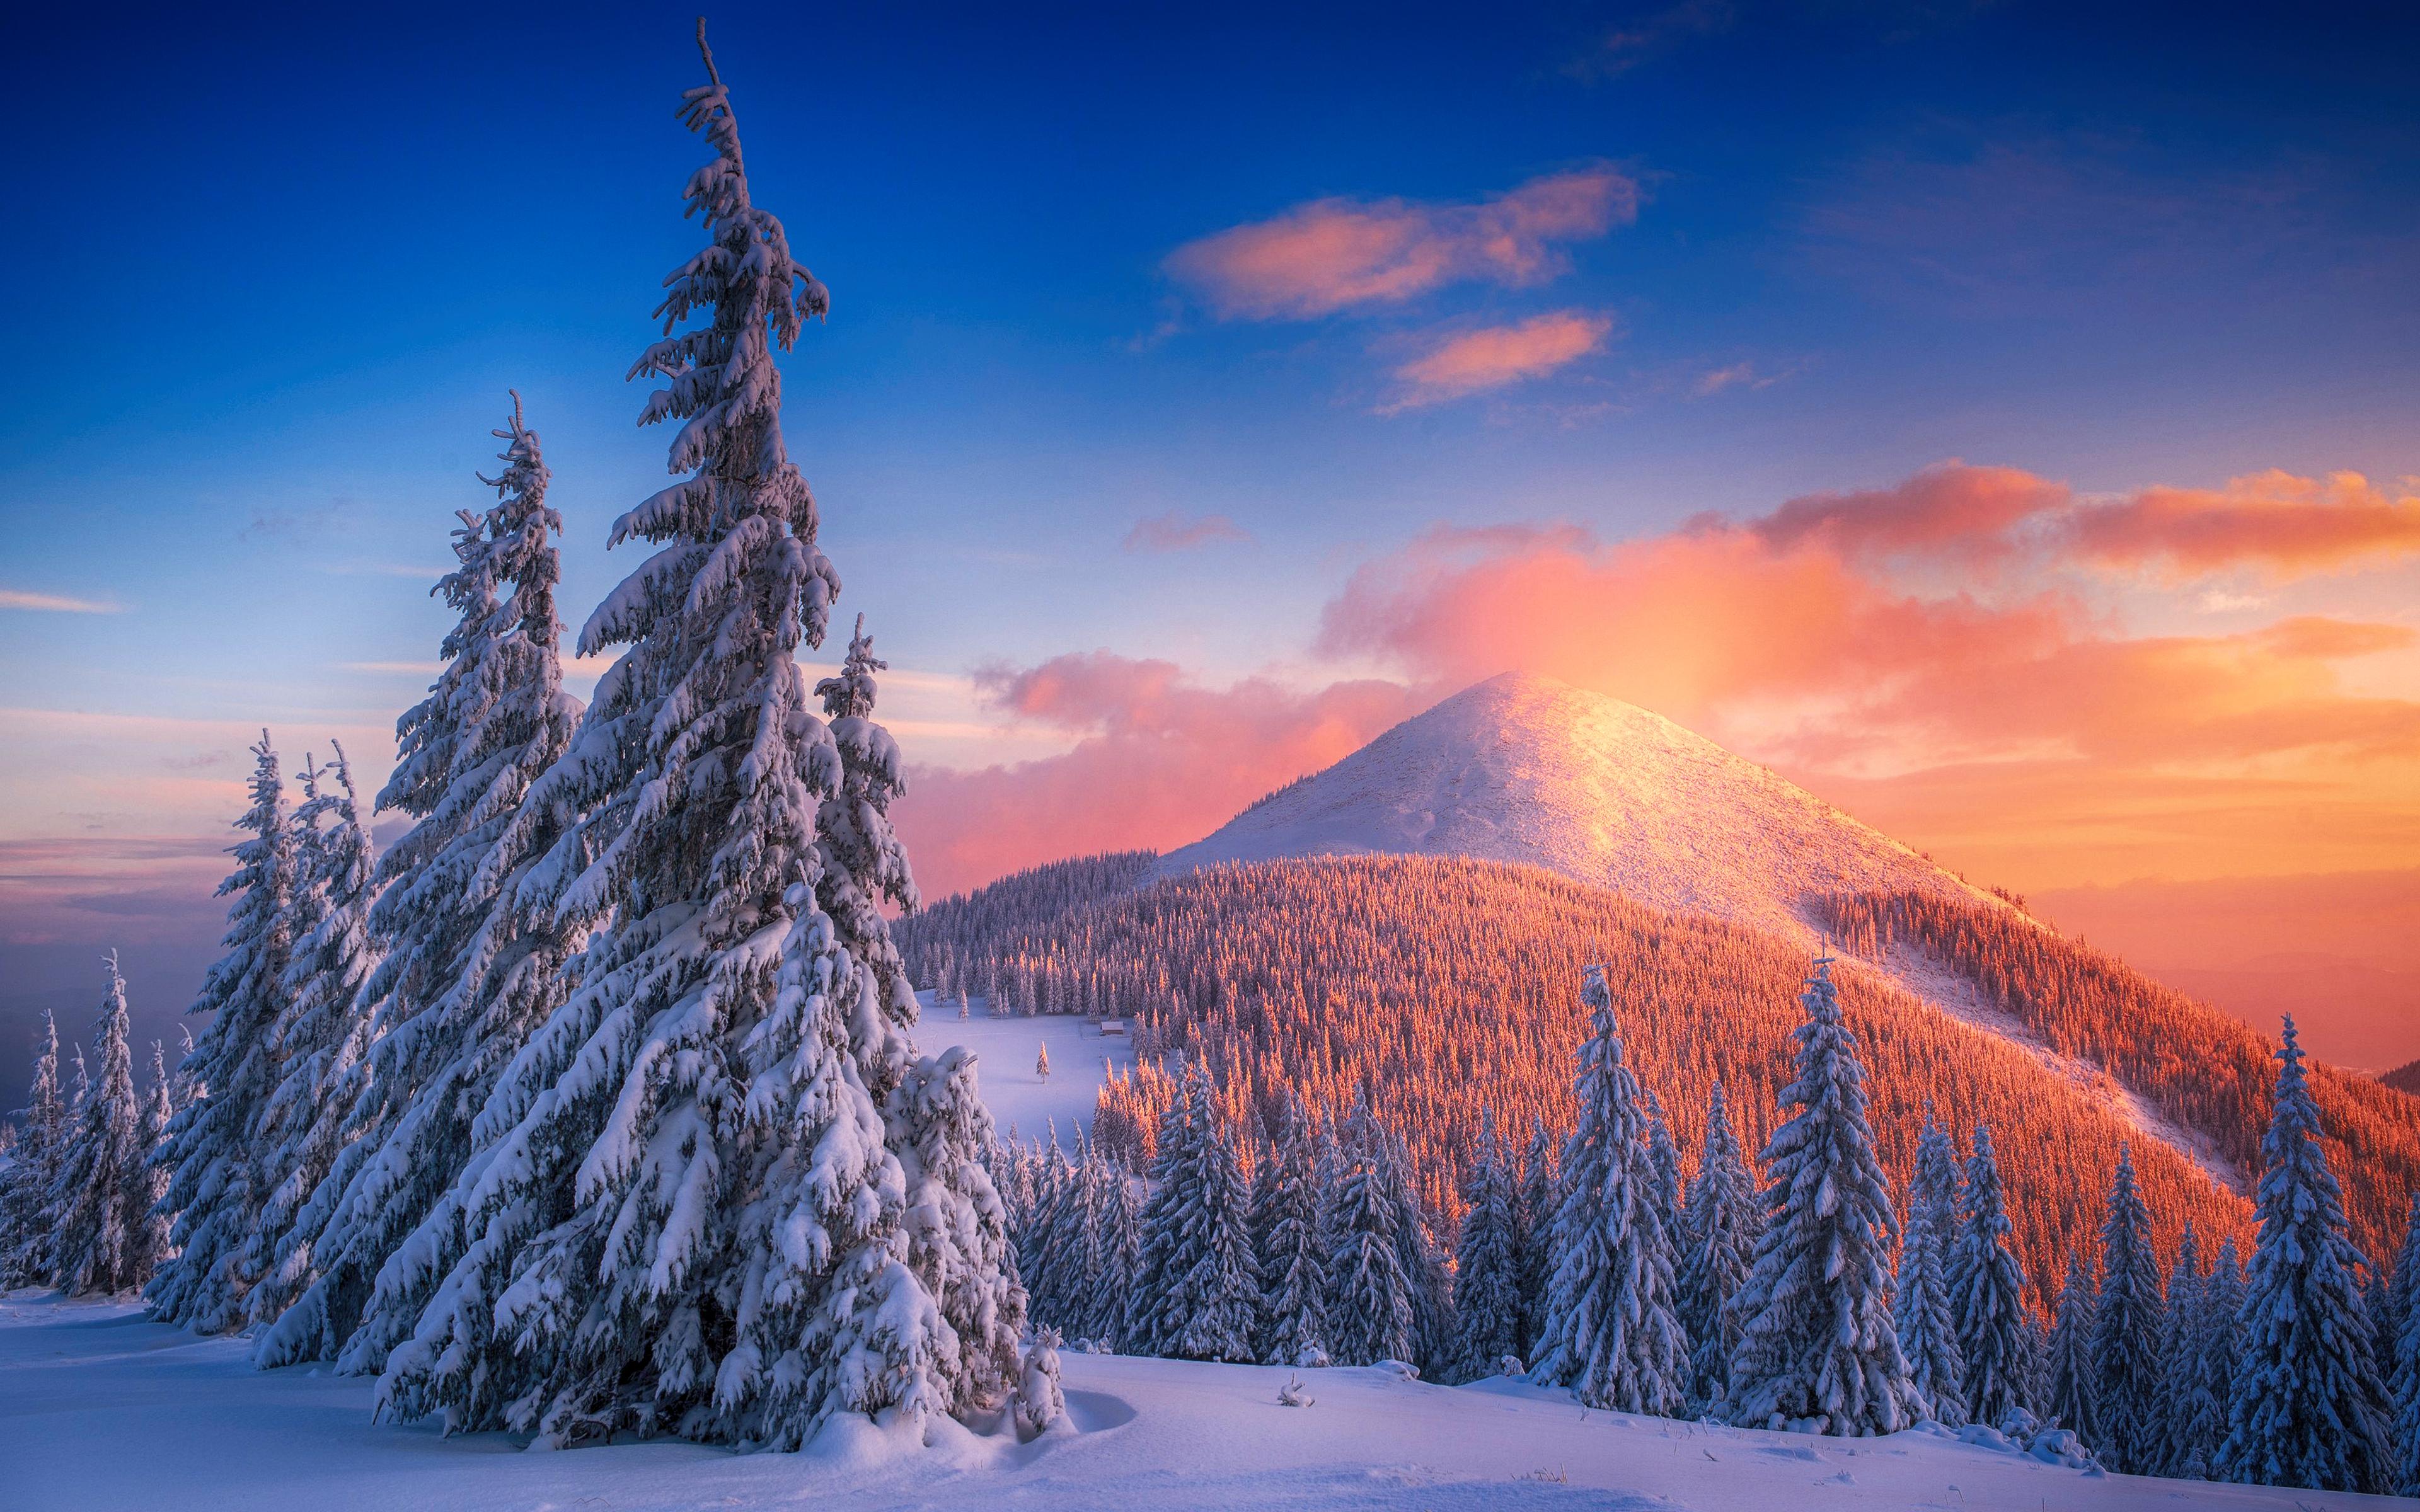 Snowy pine trees at sunset in mountains Wallpapers 4k Ultra